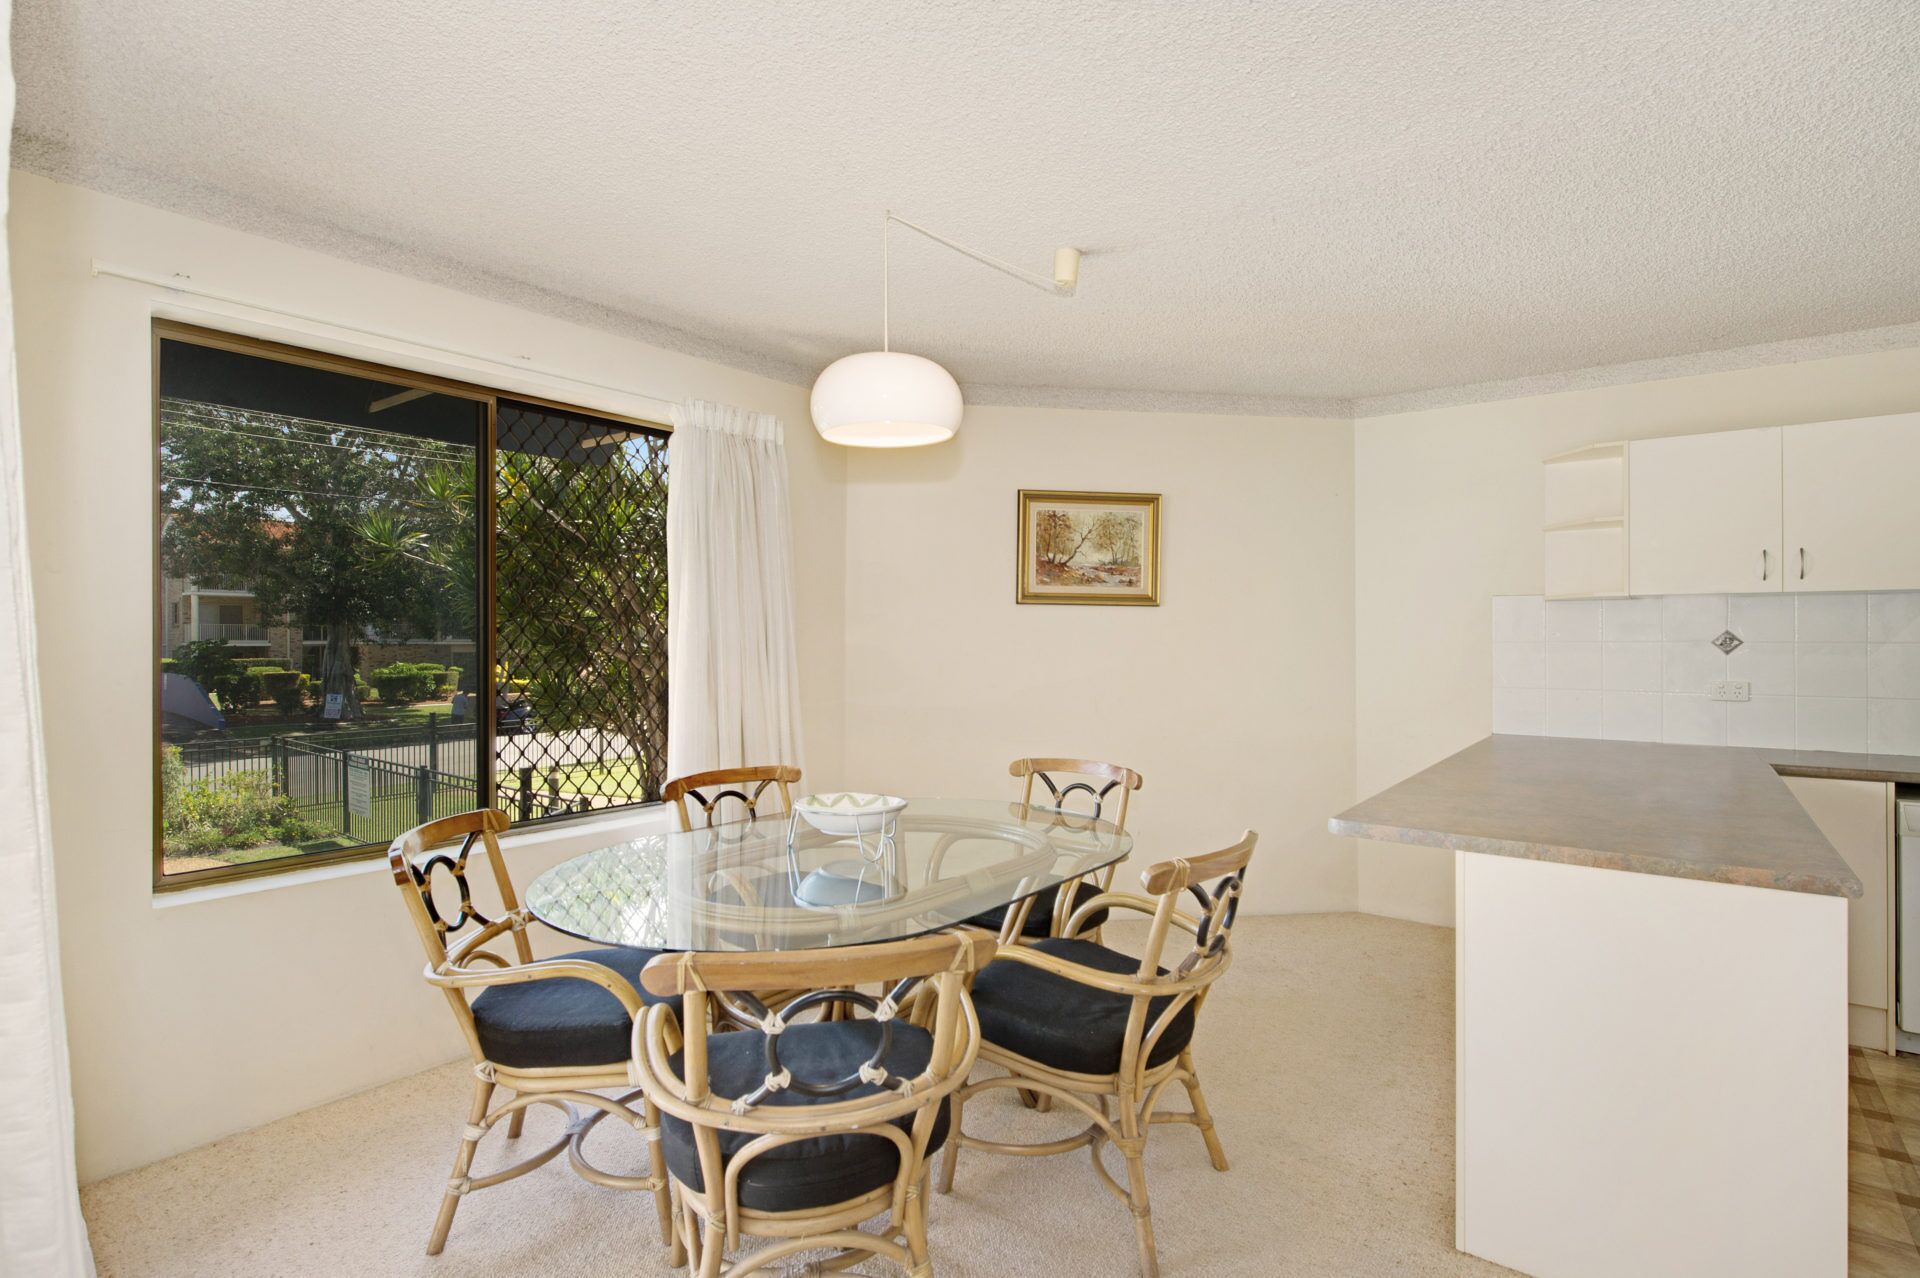 Everything you Need Including a Pool! Karoonda Sands Apartments